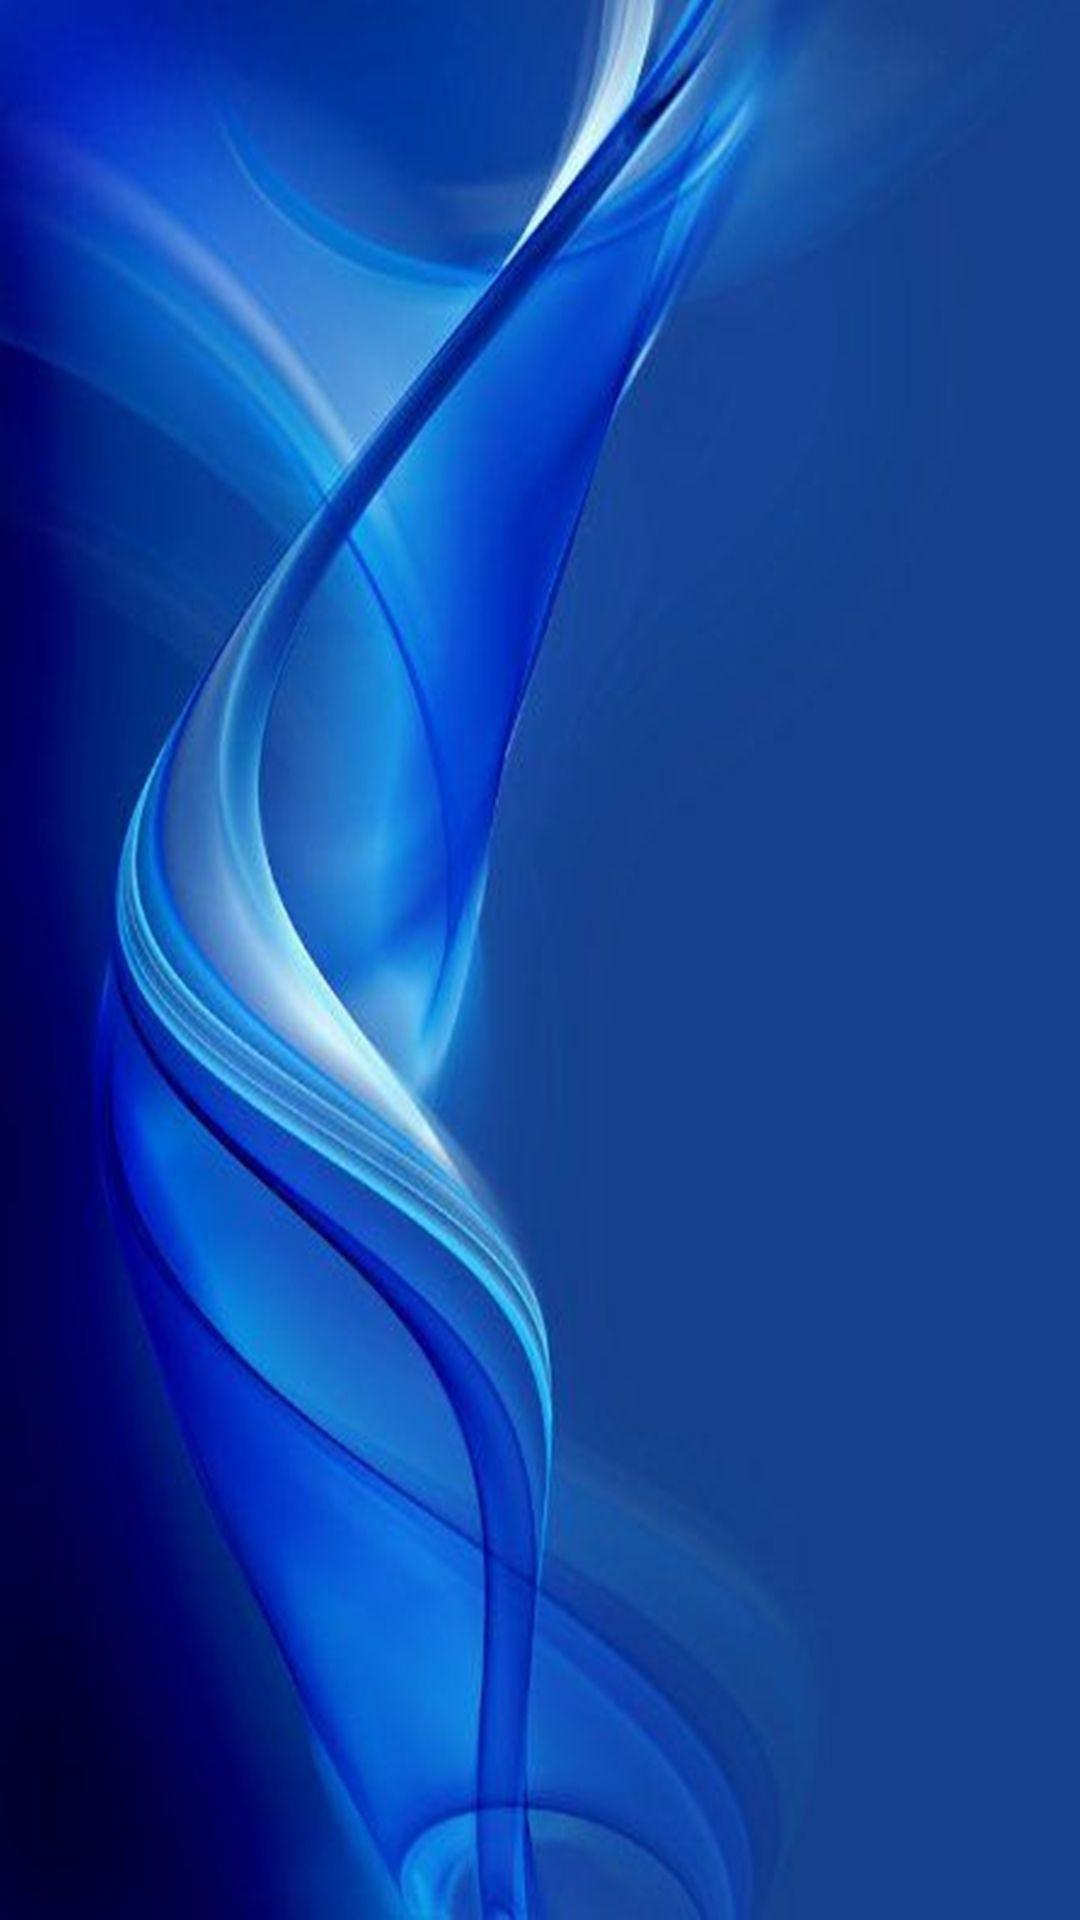 1920x1200 Royal Blue Traditional Solid Color Background